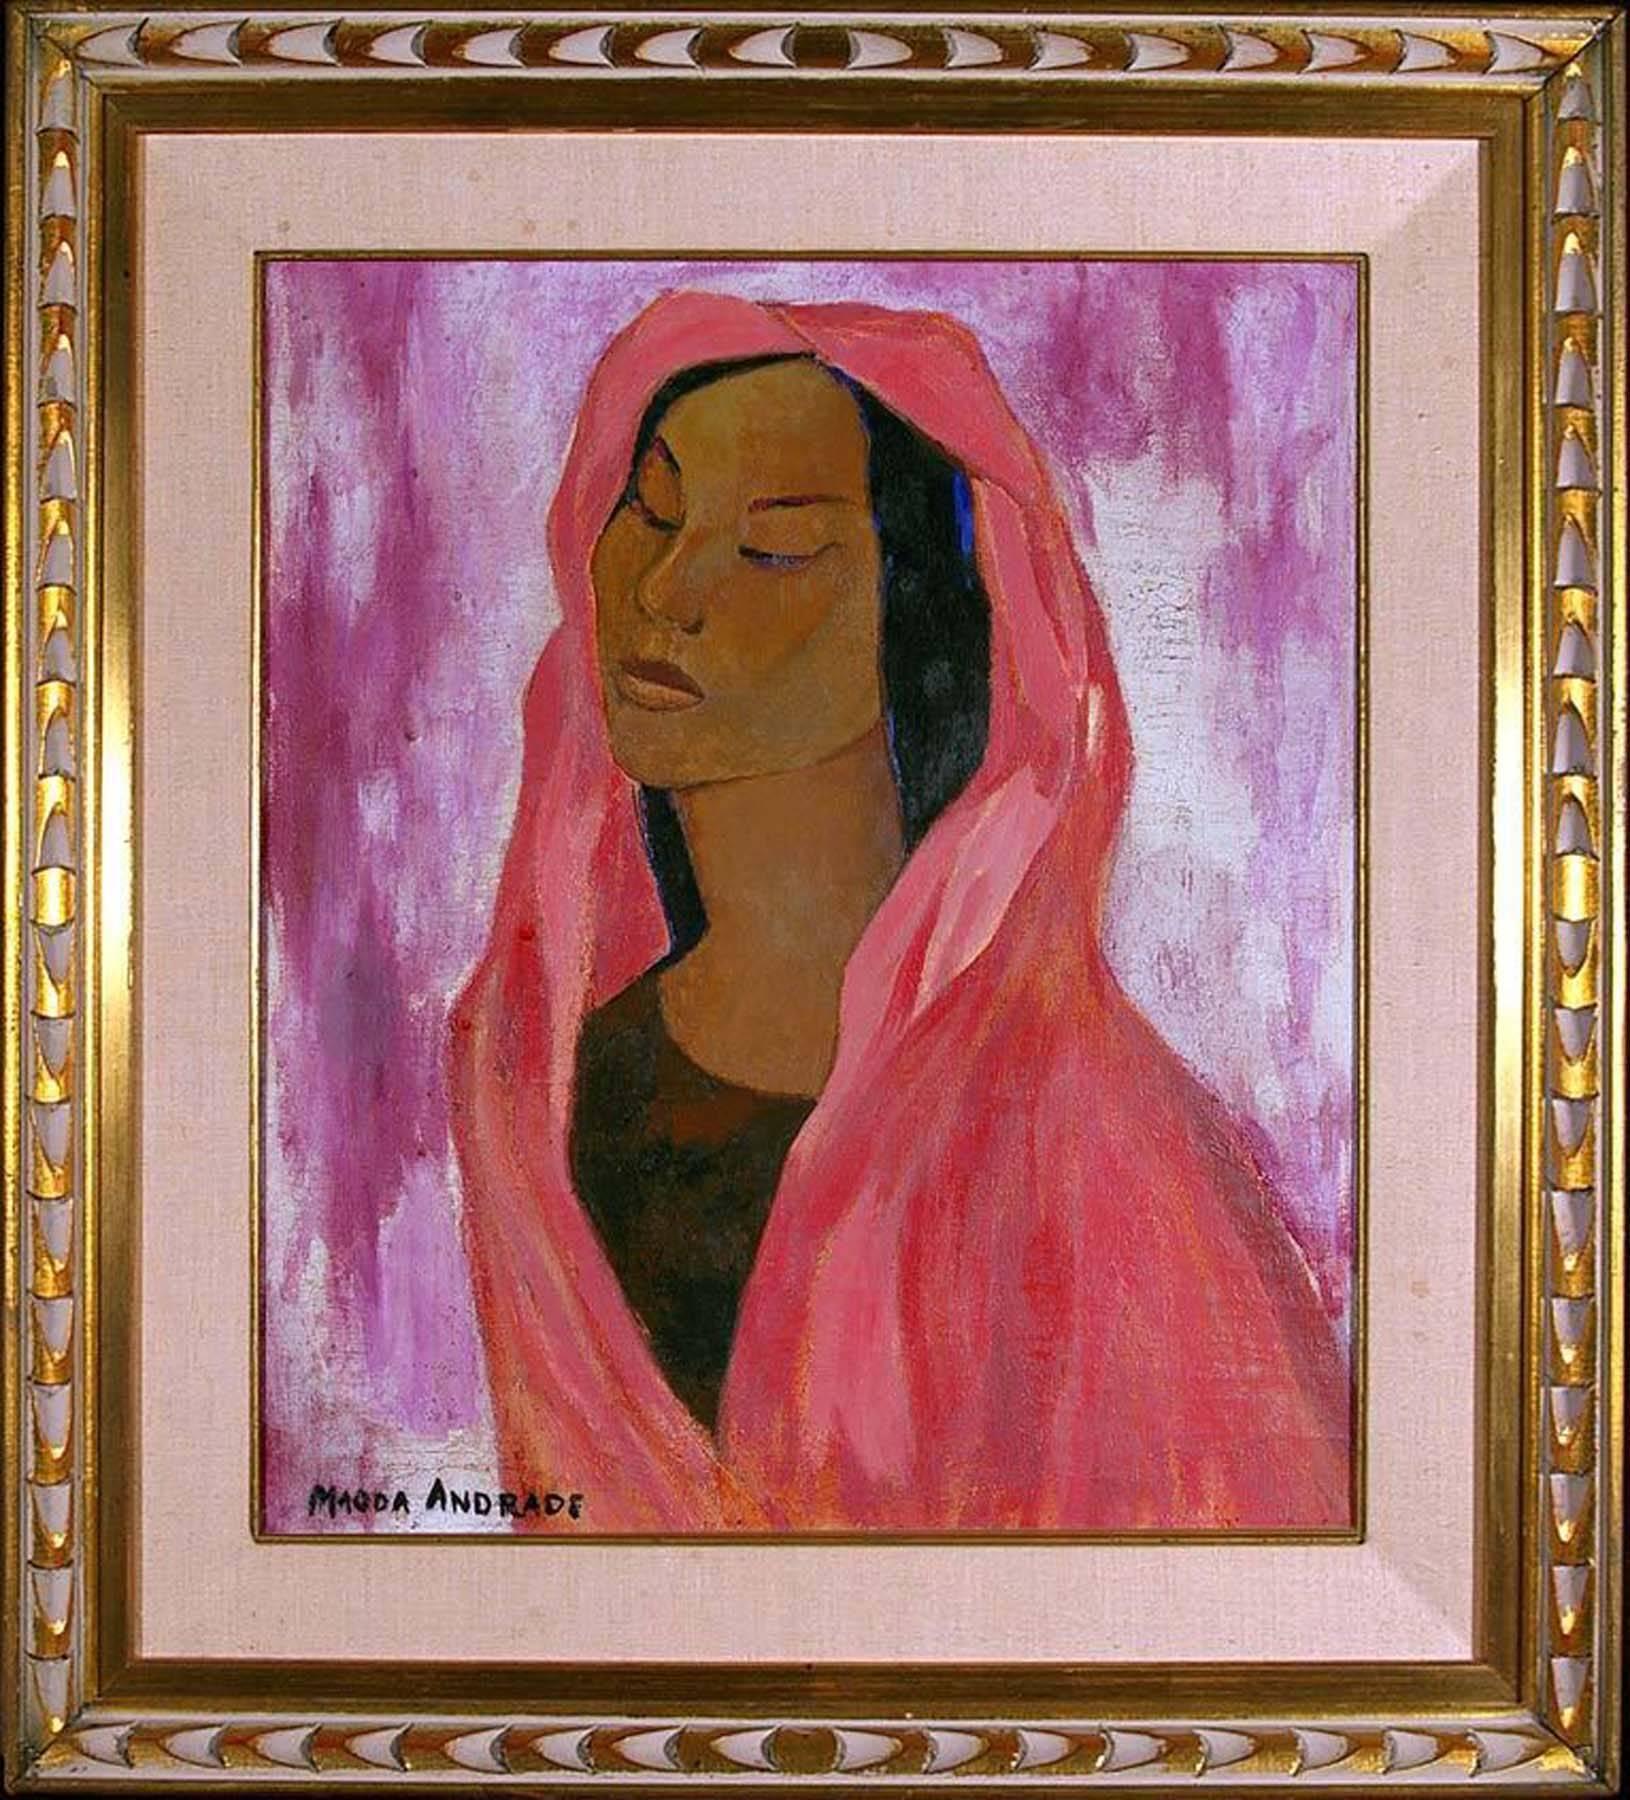 PORTRAIT OF A WOMAN - Painting by Magda Andrade